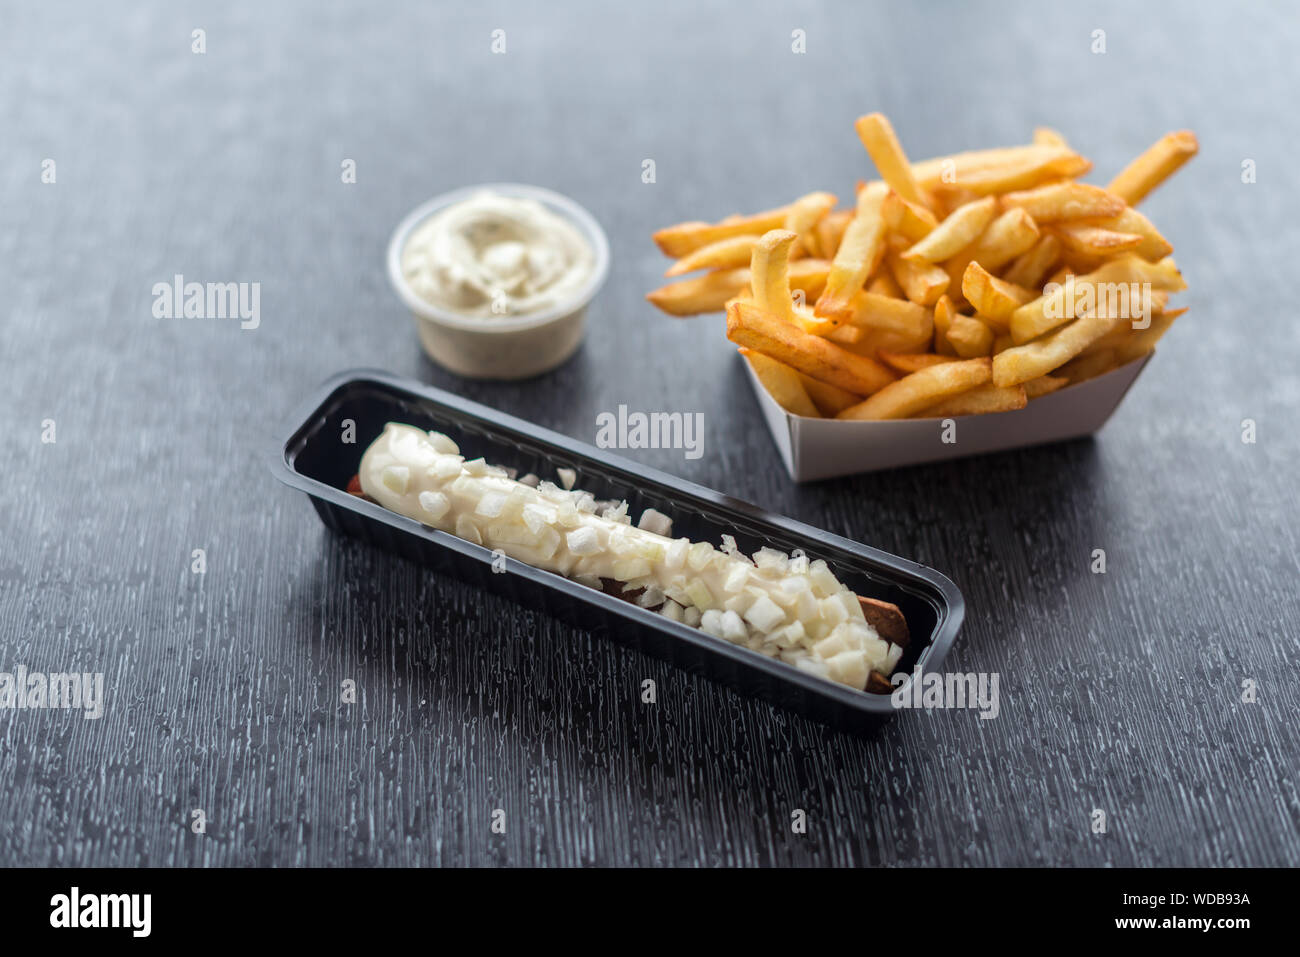 Frikandel with sauce and french fries. Horizontal image. Stock Photo